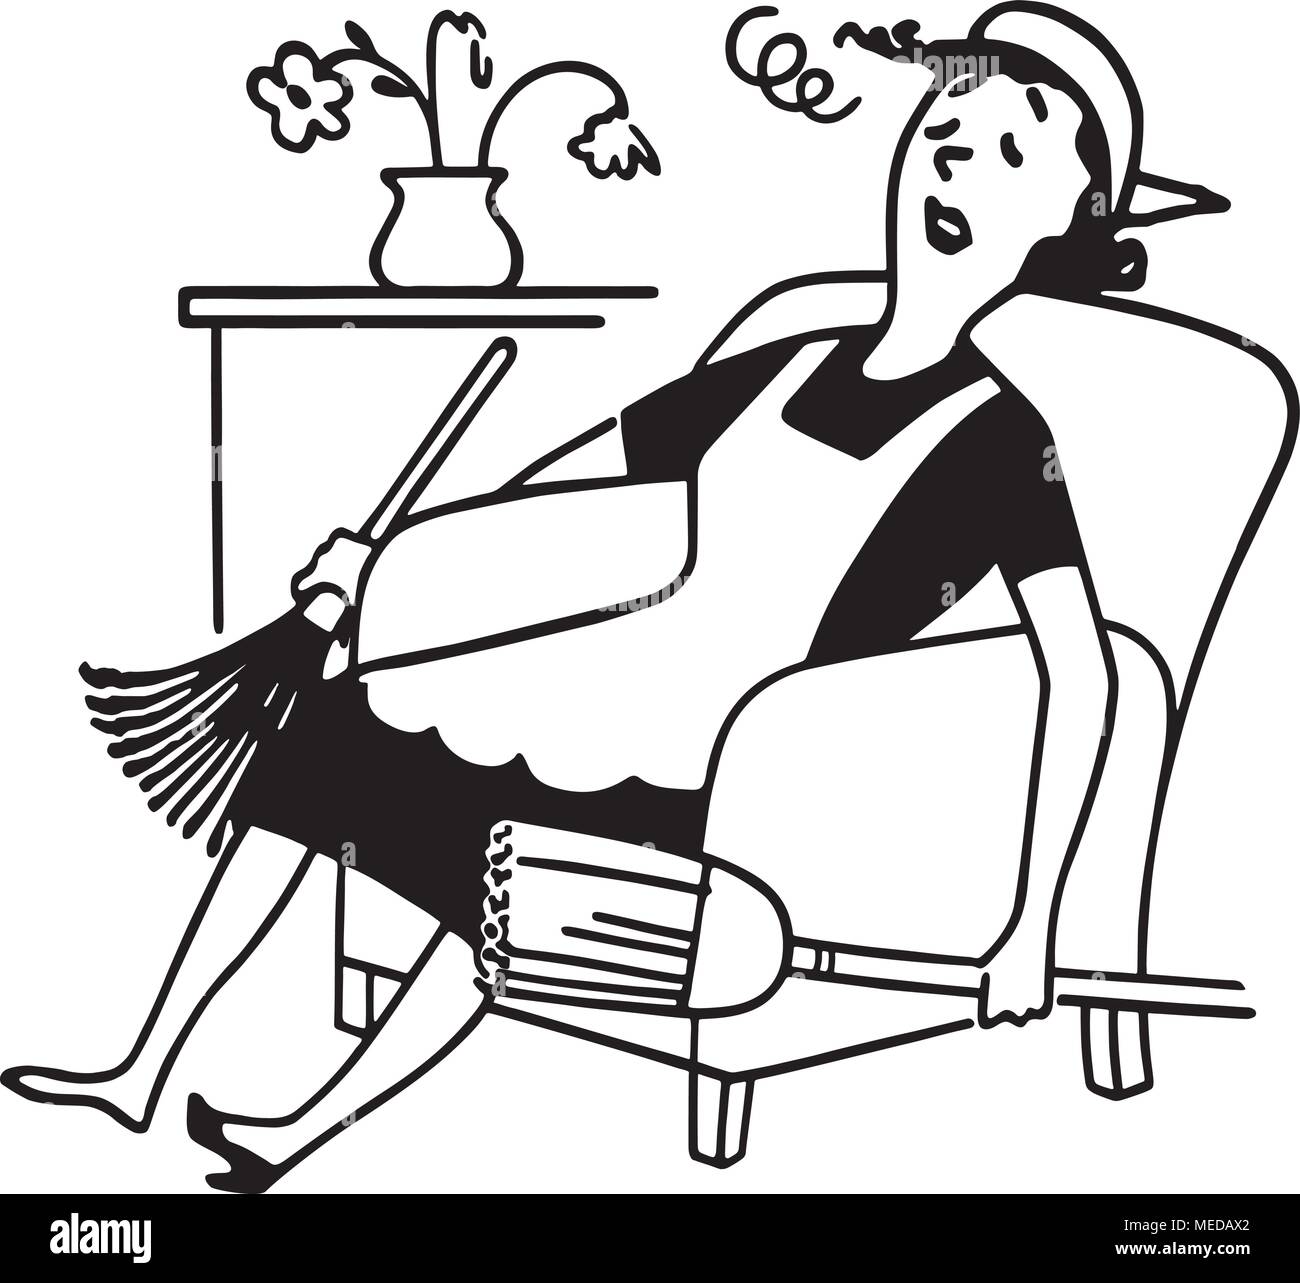 Exhausted Housewife - Retro Clipart Illustration Stock Vector